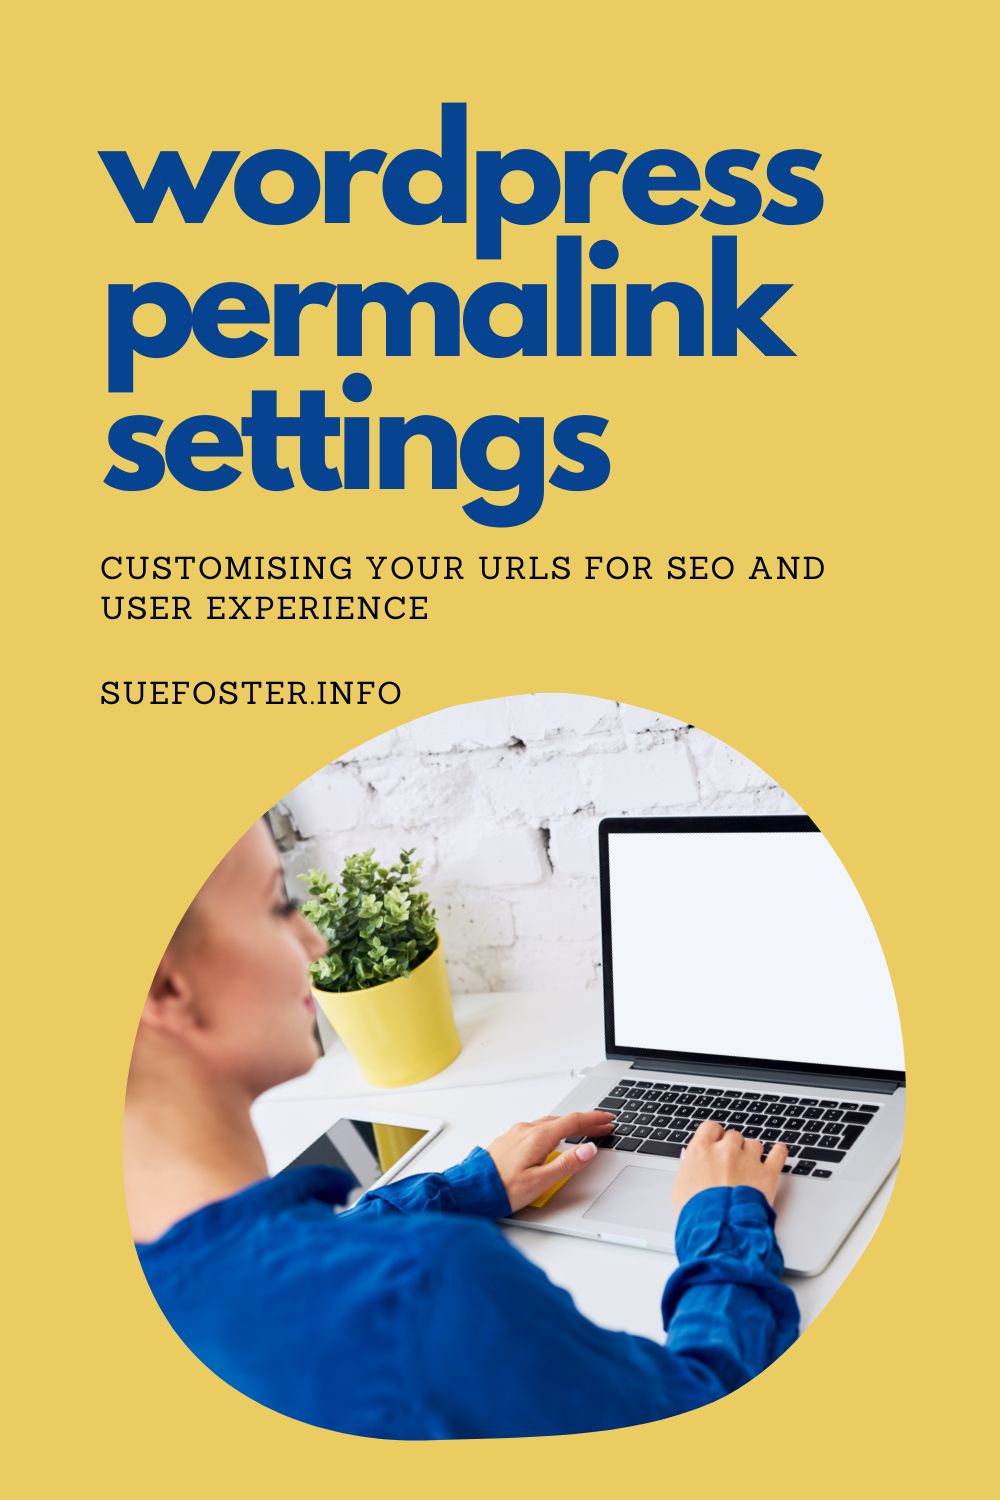 Learn how to optimise your WordPress permalink settings for better SEO and user experience. Choose the best structure for success.